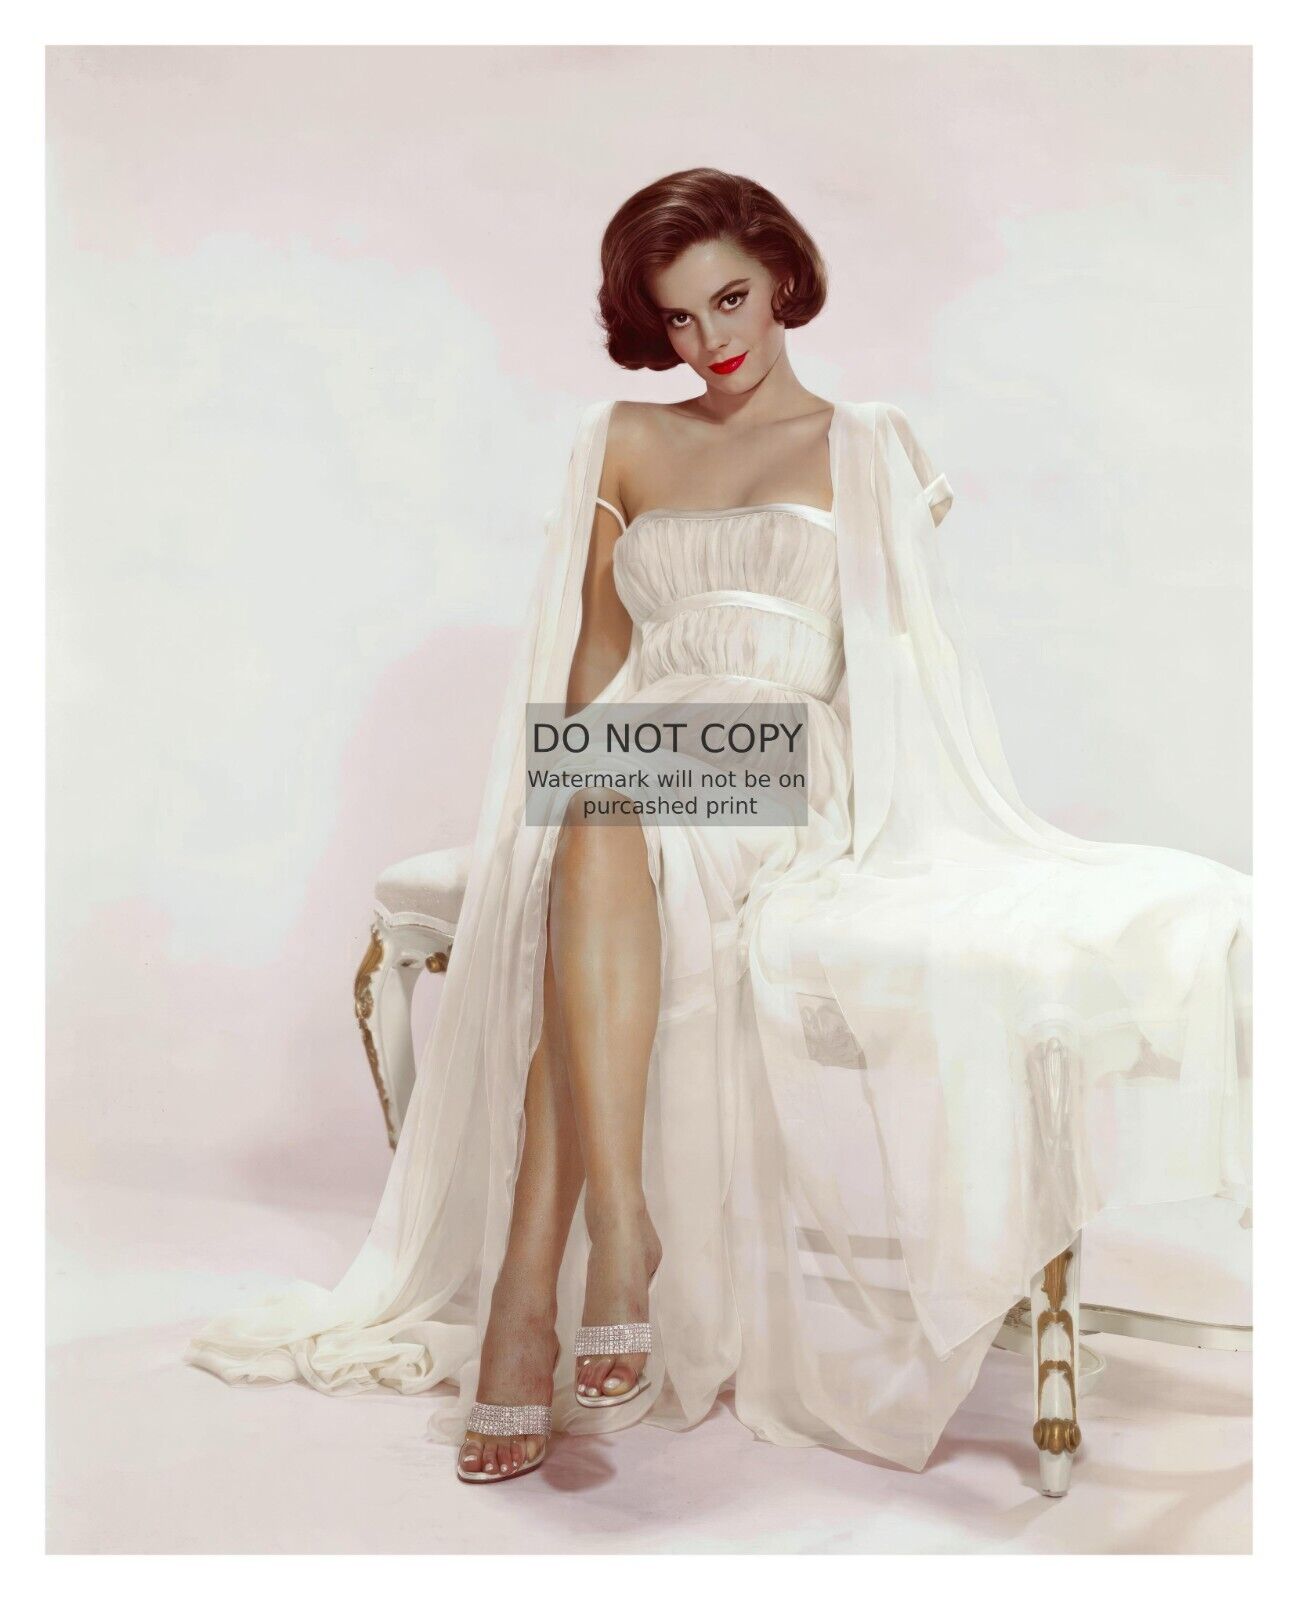 NATALIE WOOD SEXY AMERICAN MODEL IN WHITE DRESS 8X10 PHOTO